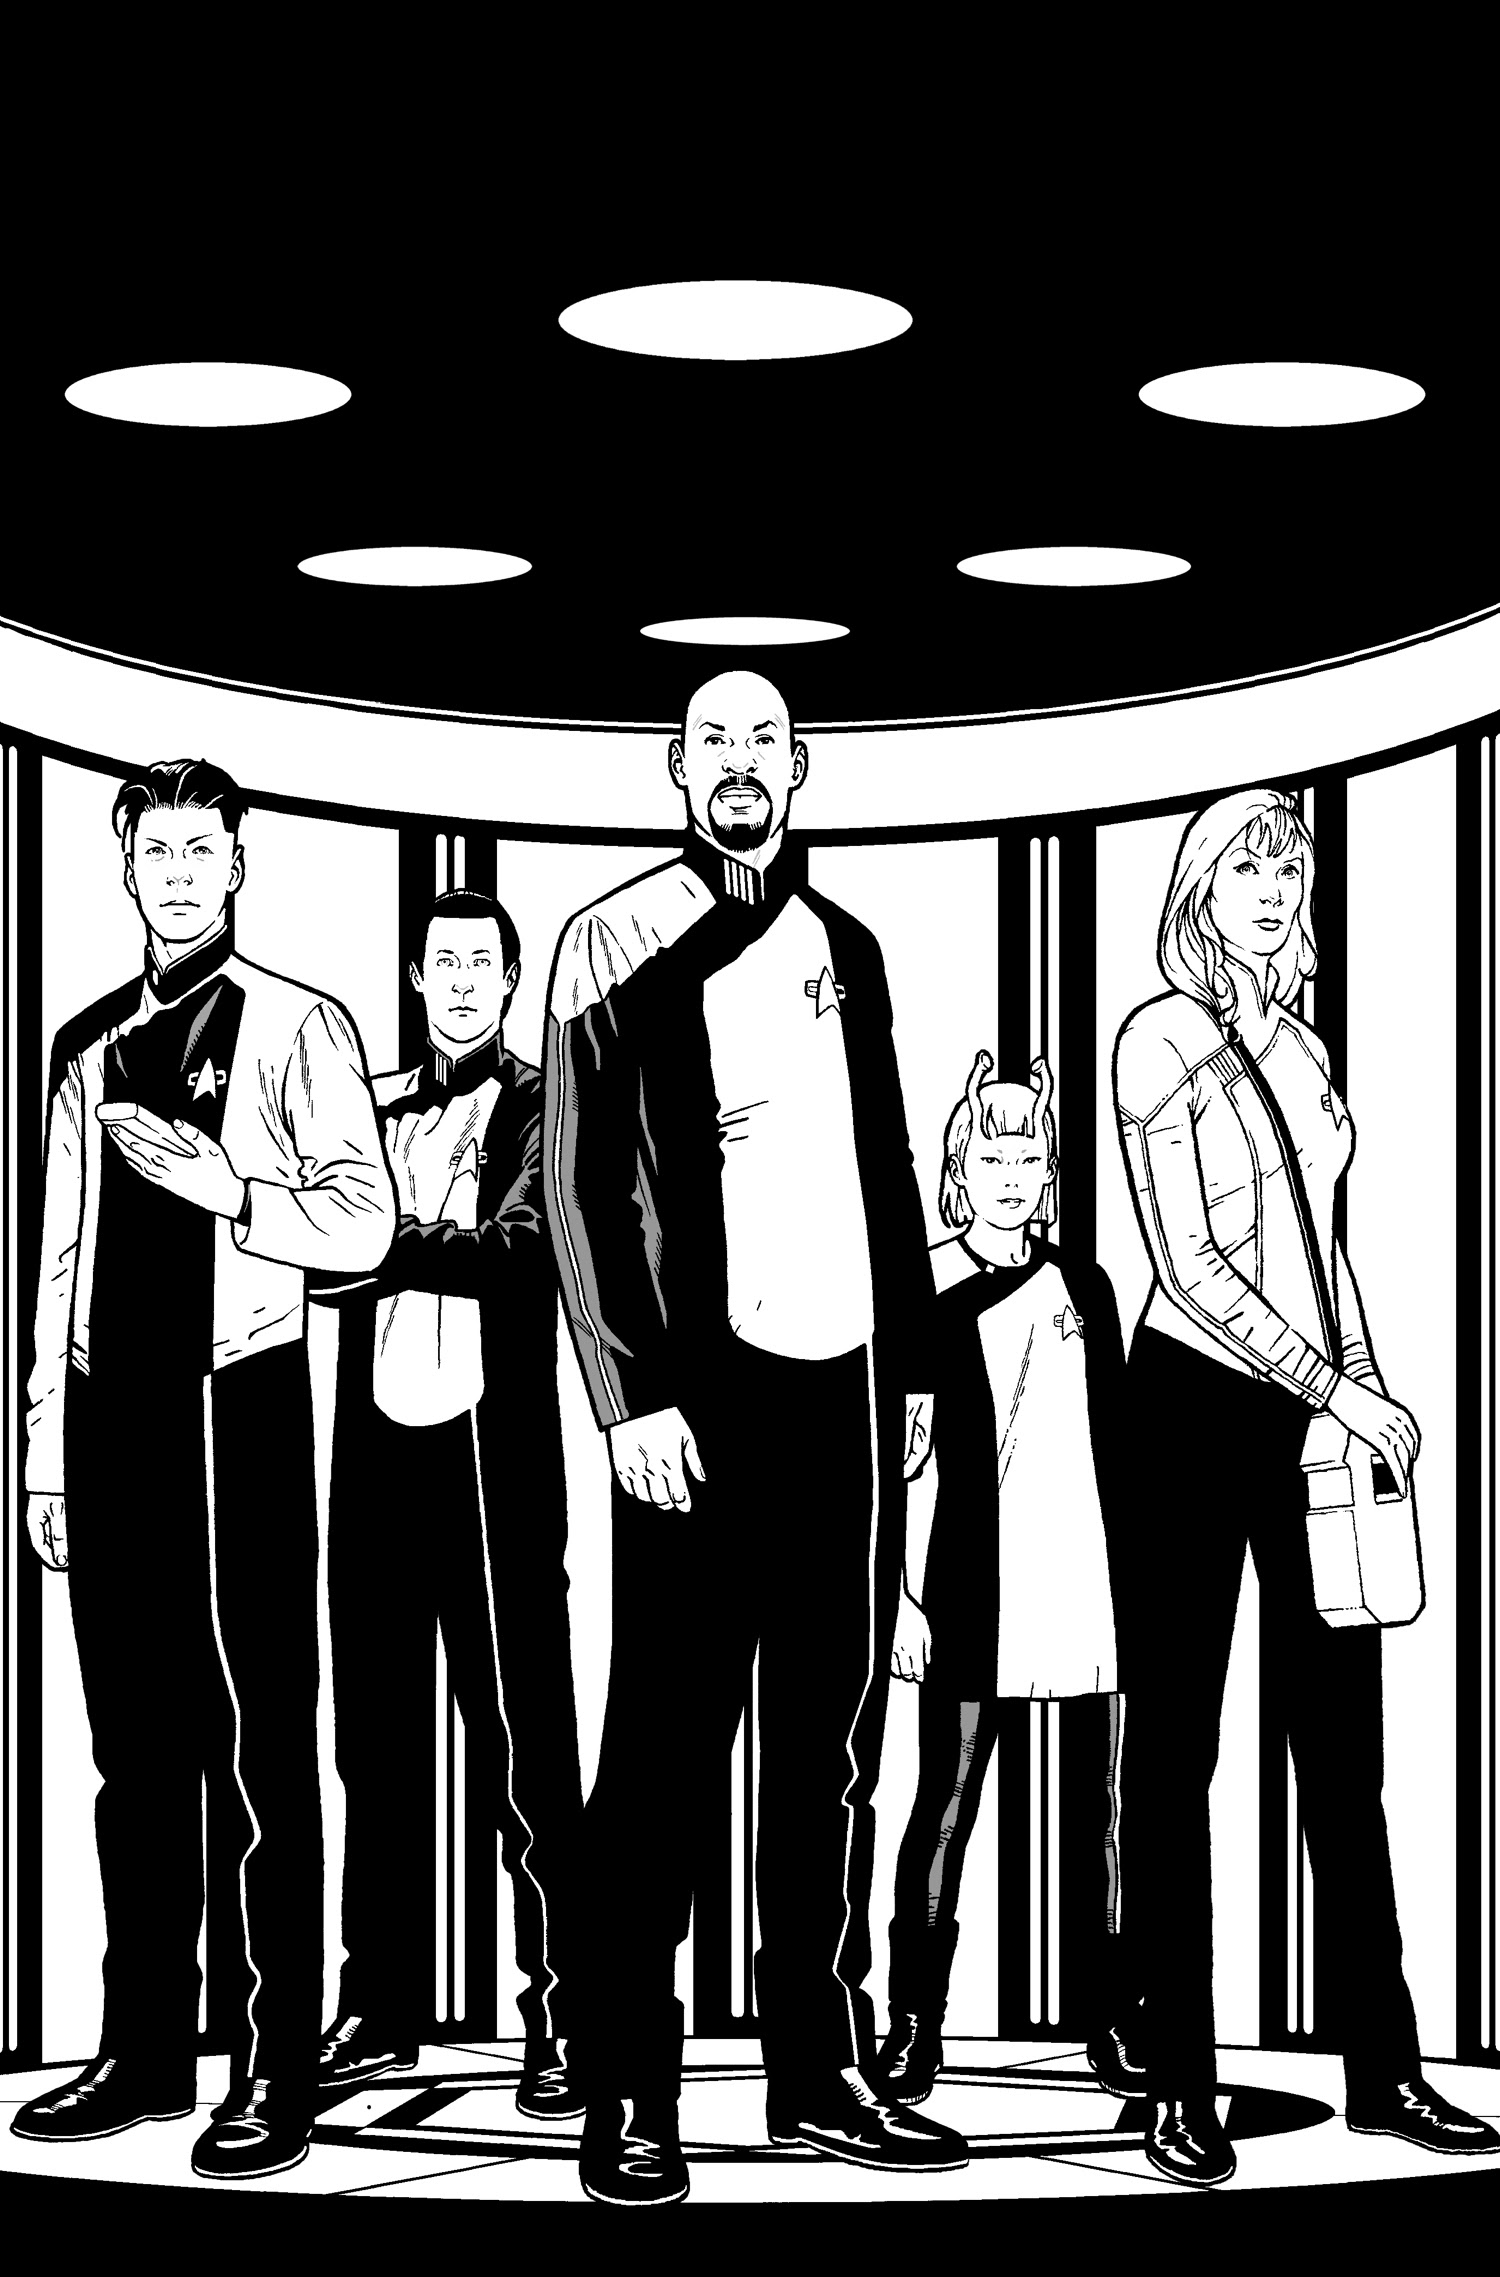 Several Star Trek characters stand in a transporter, a fictional teleportation device.